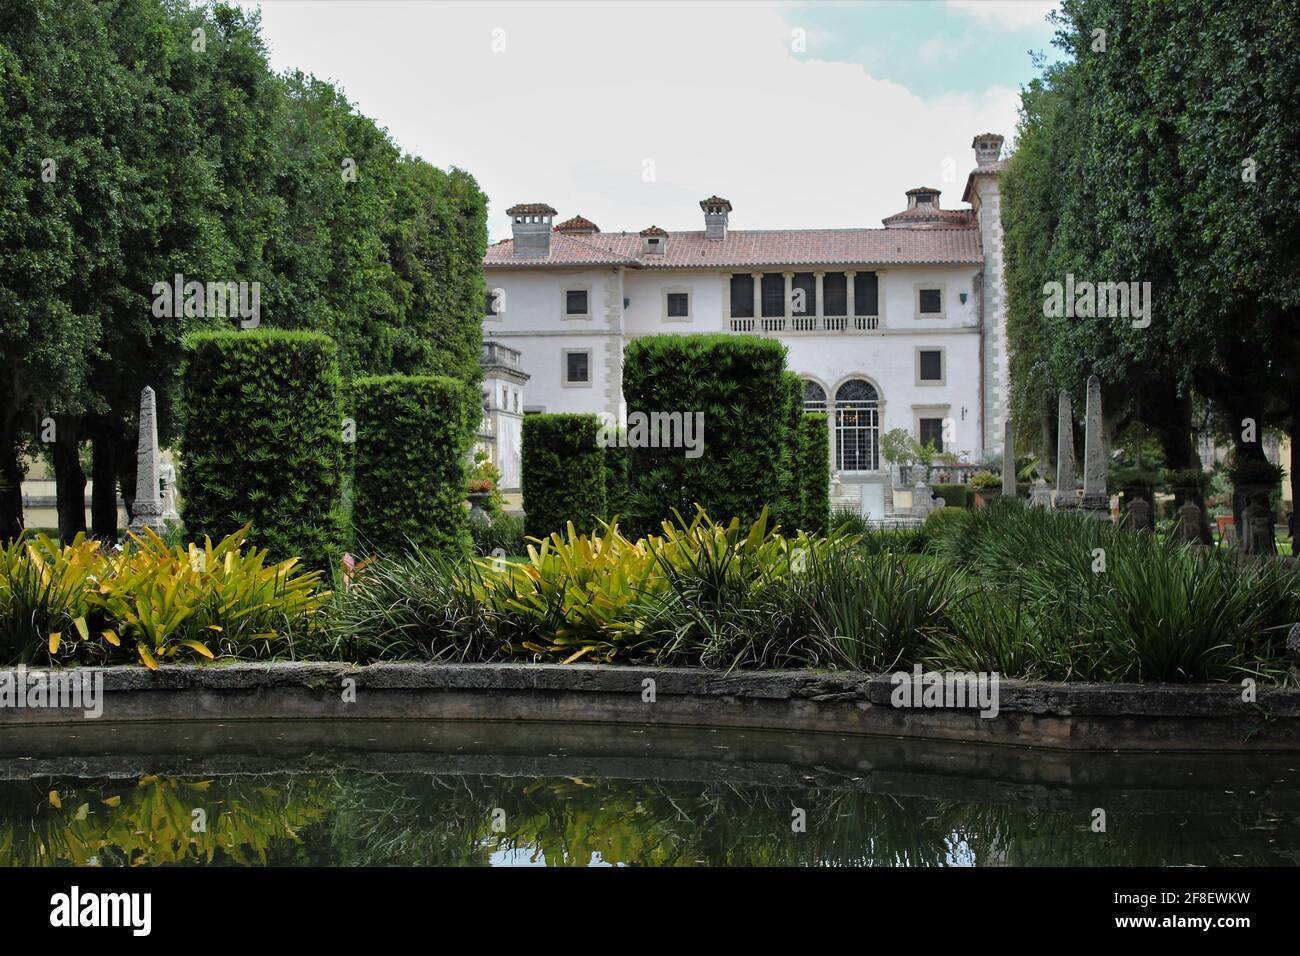 Outdoor view of The Vizcaya Museum and Garden. Nature landscape and pond scenery. Stock Photo